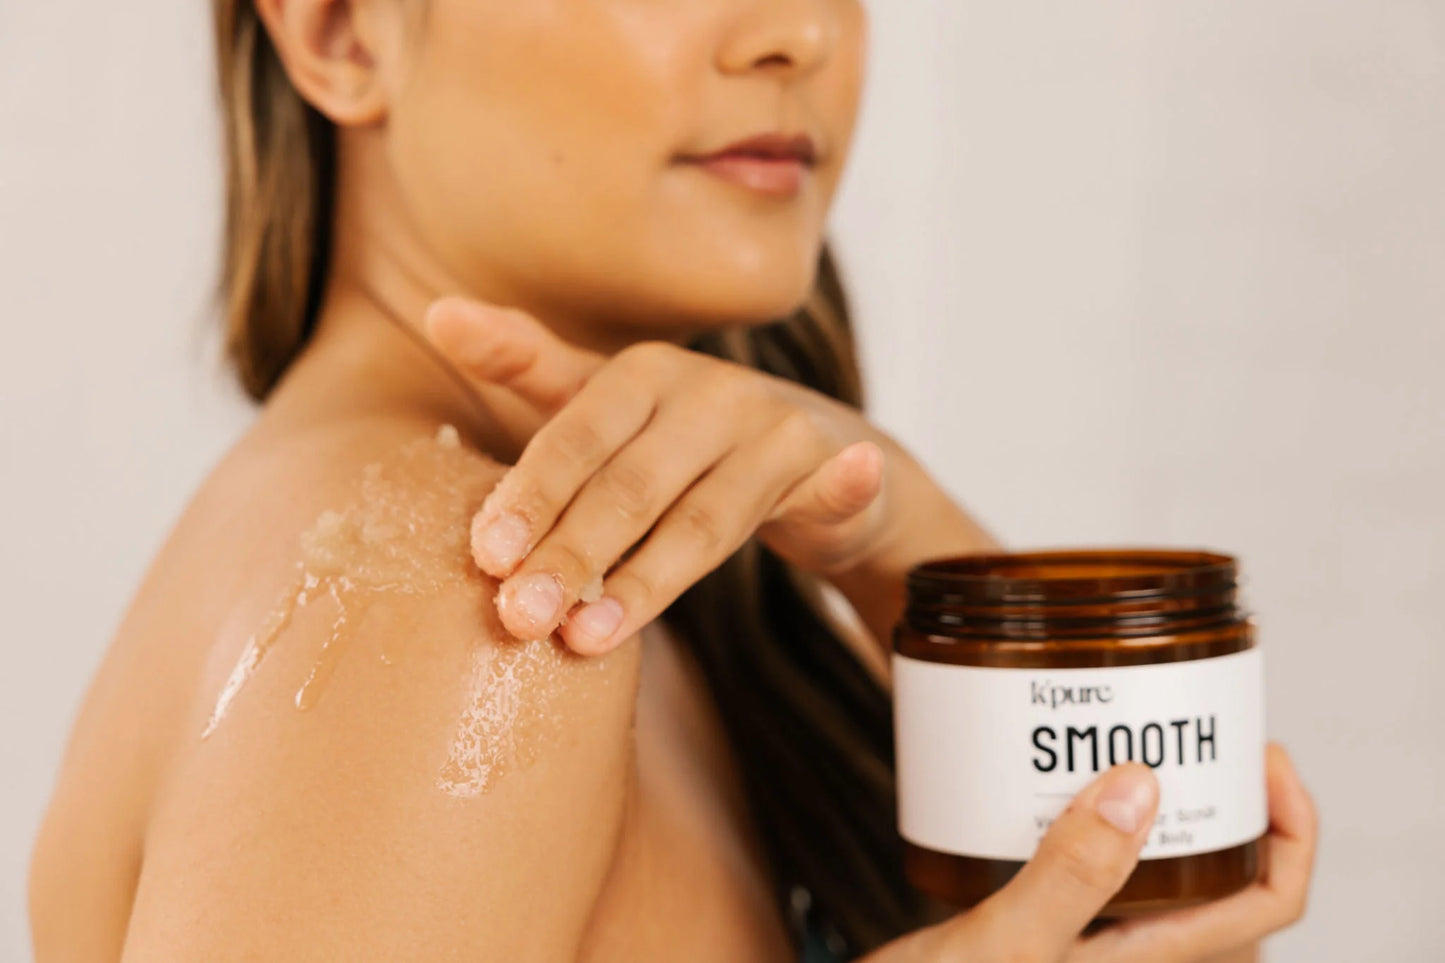 K'Pure Smooth Organic Sugar Scrub for Hands and Body